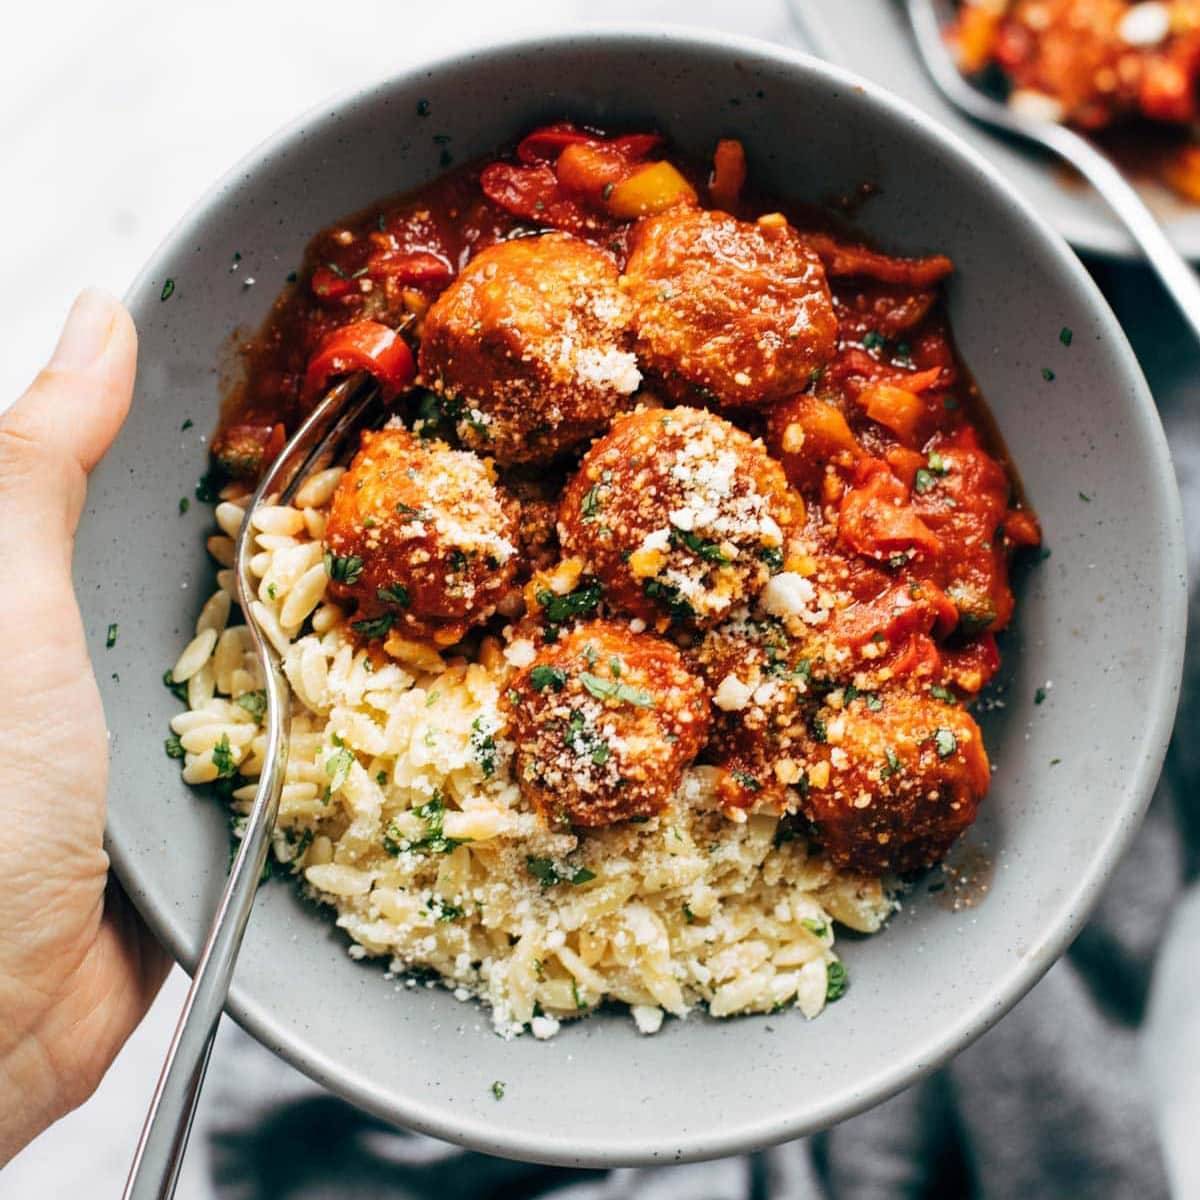 Crispy chicken meatballs, pepper and orzo in a bowl with fork.